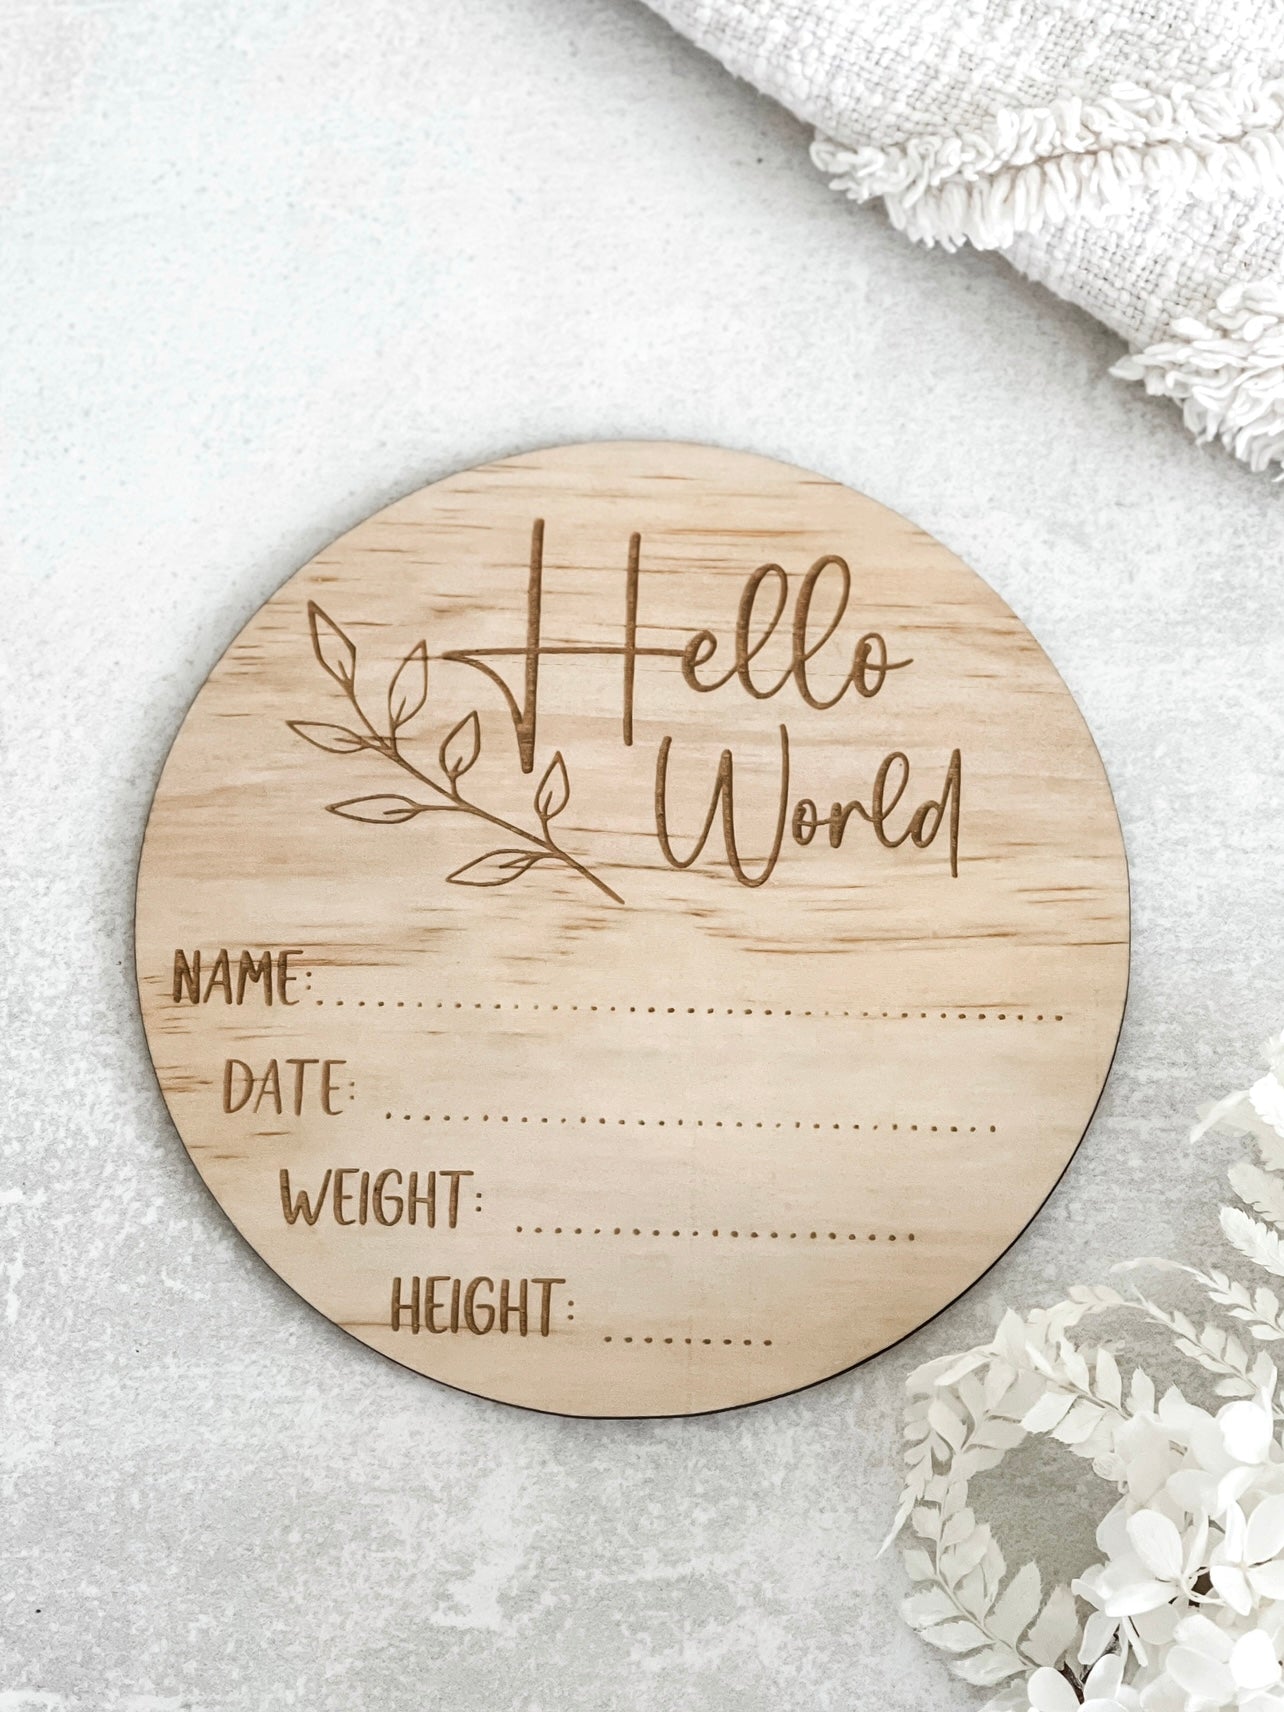 Hello World - Announcement plaque - The Humble Gift Co.